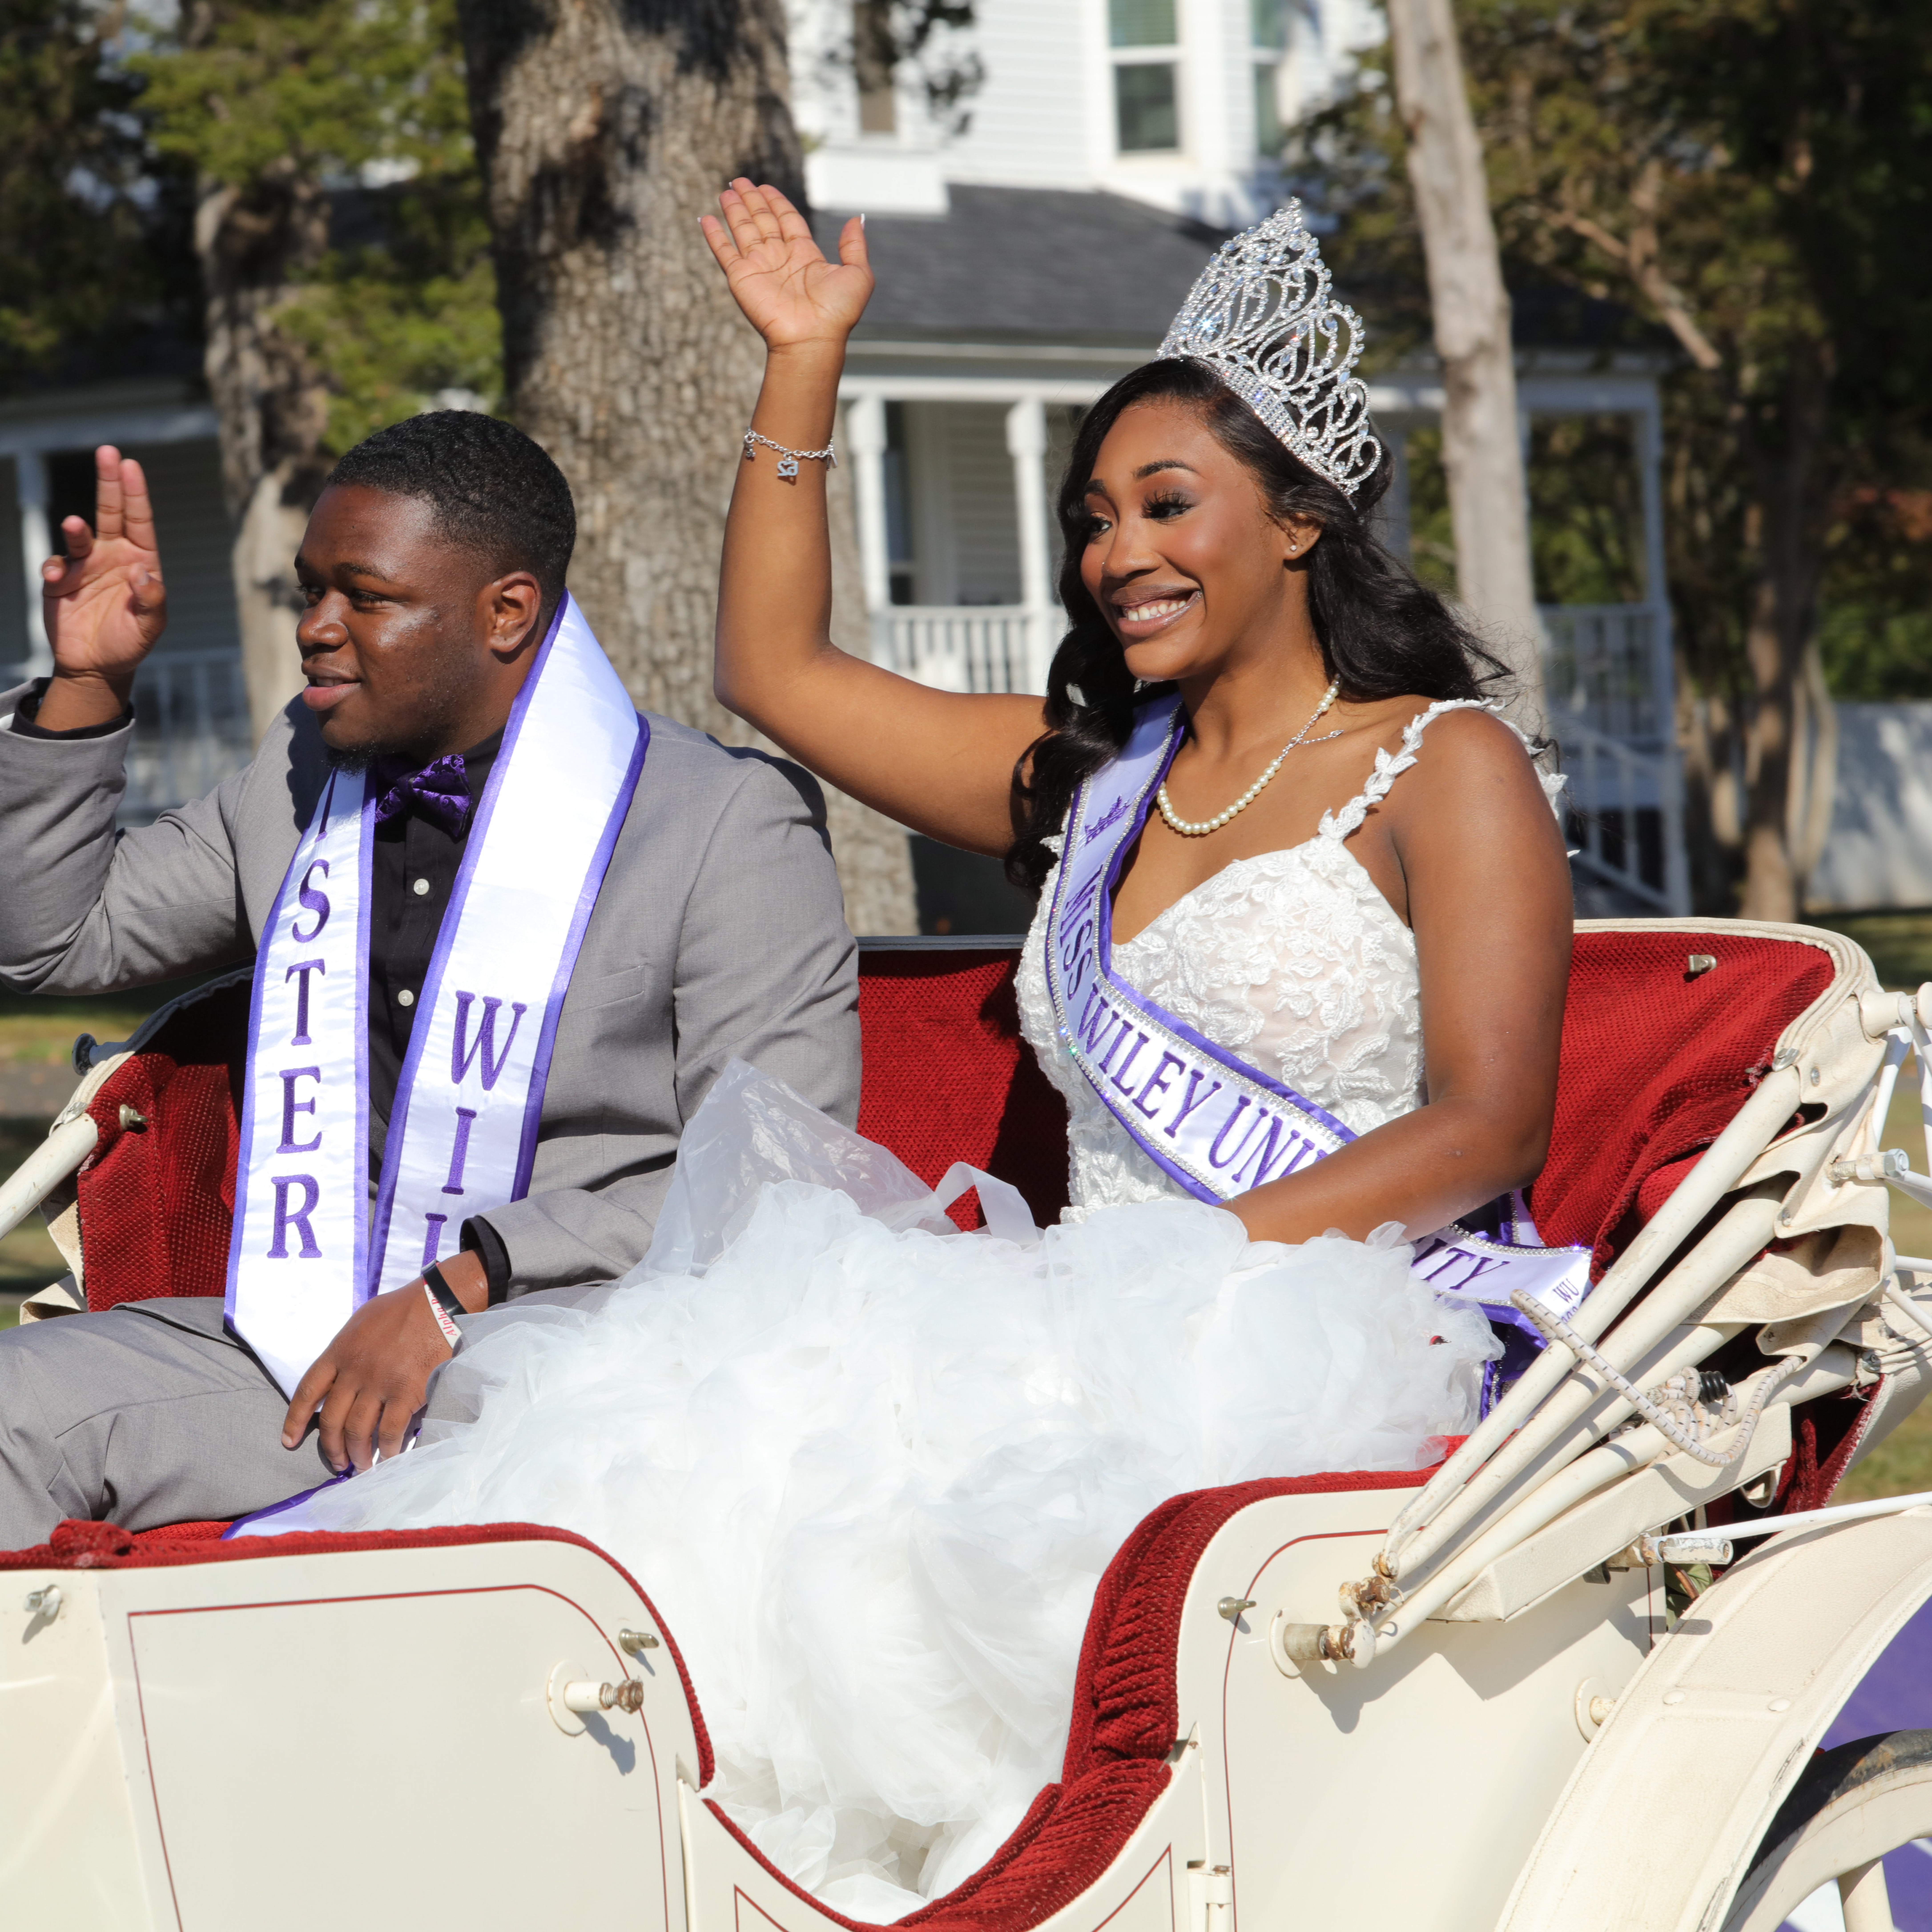 Miss and Mr. Wiley University at the Homecoming Parade